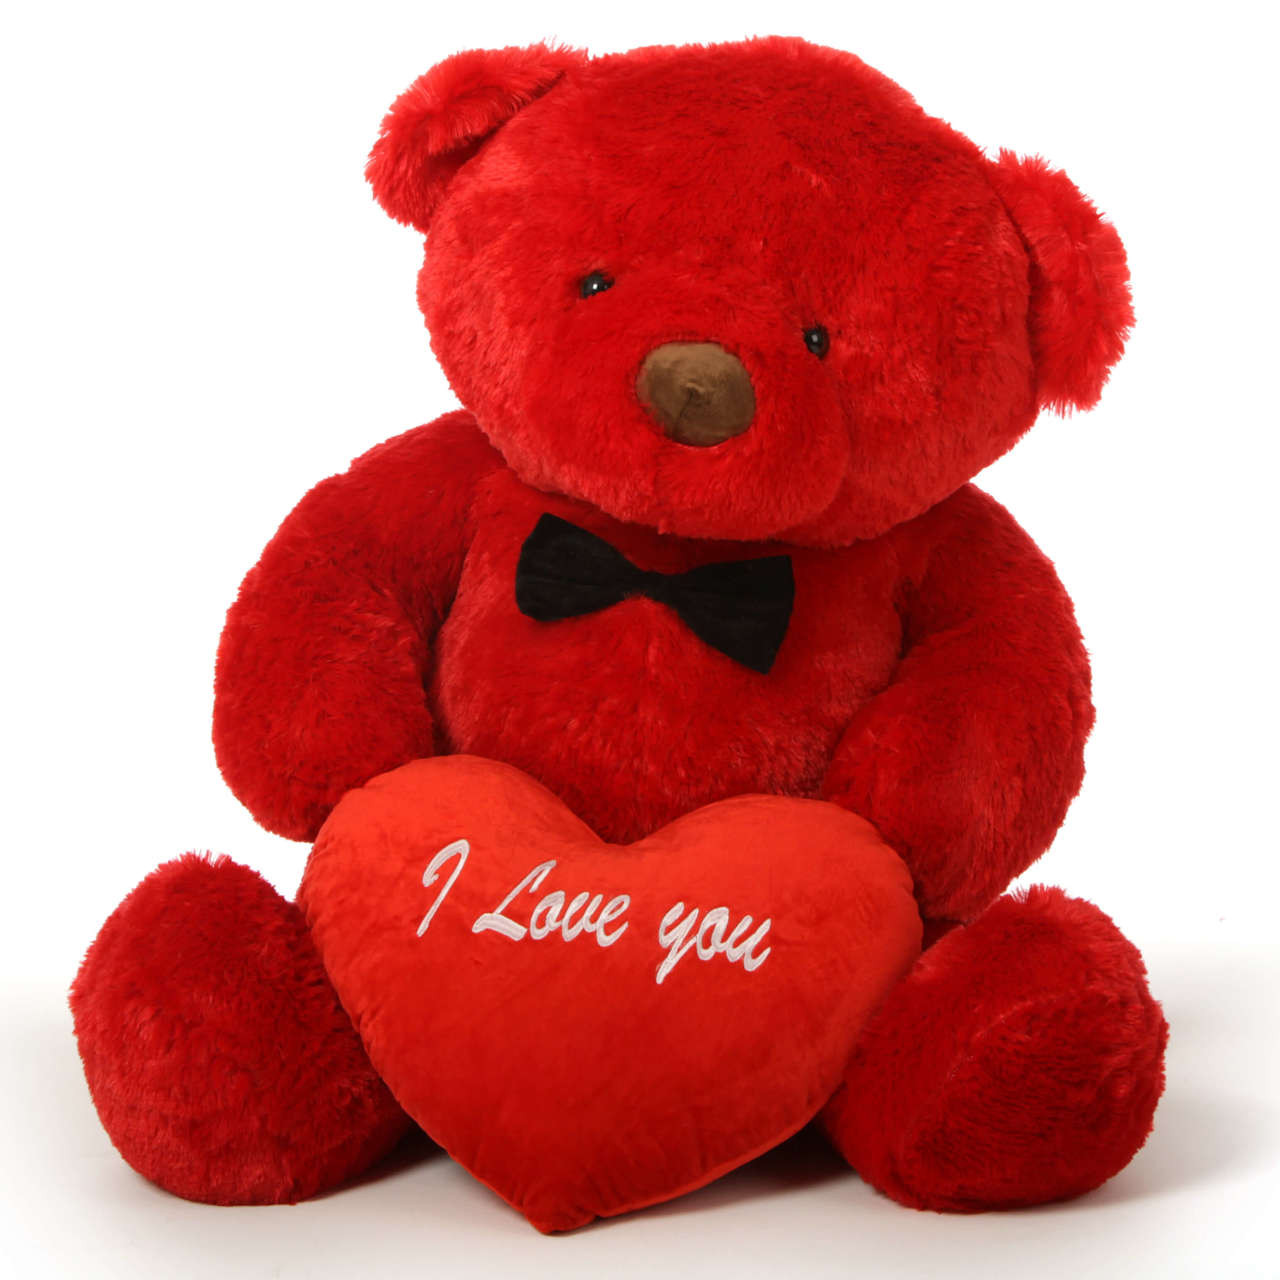 48in Riley Chubs Teddy Bear for Valentine’s Day with big “I Love You” heart